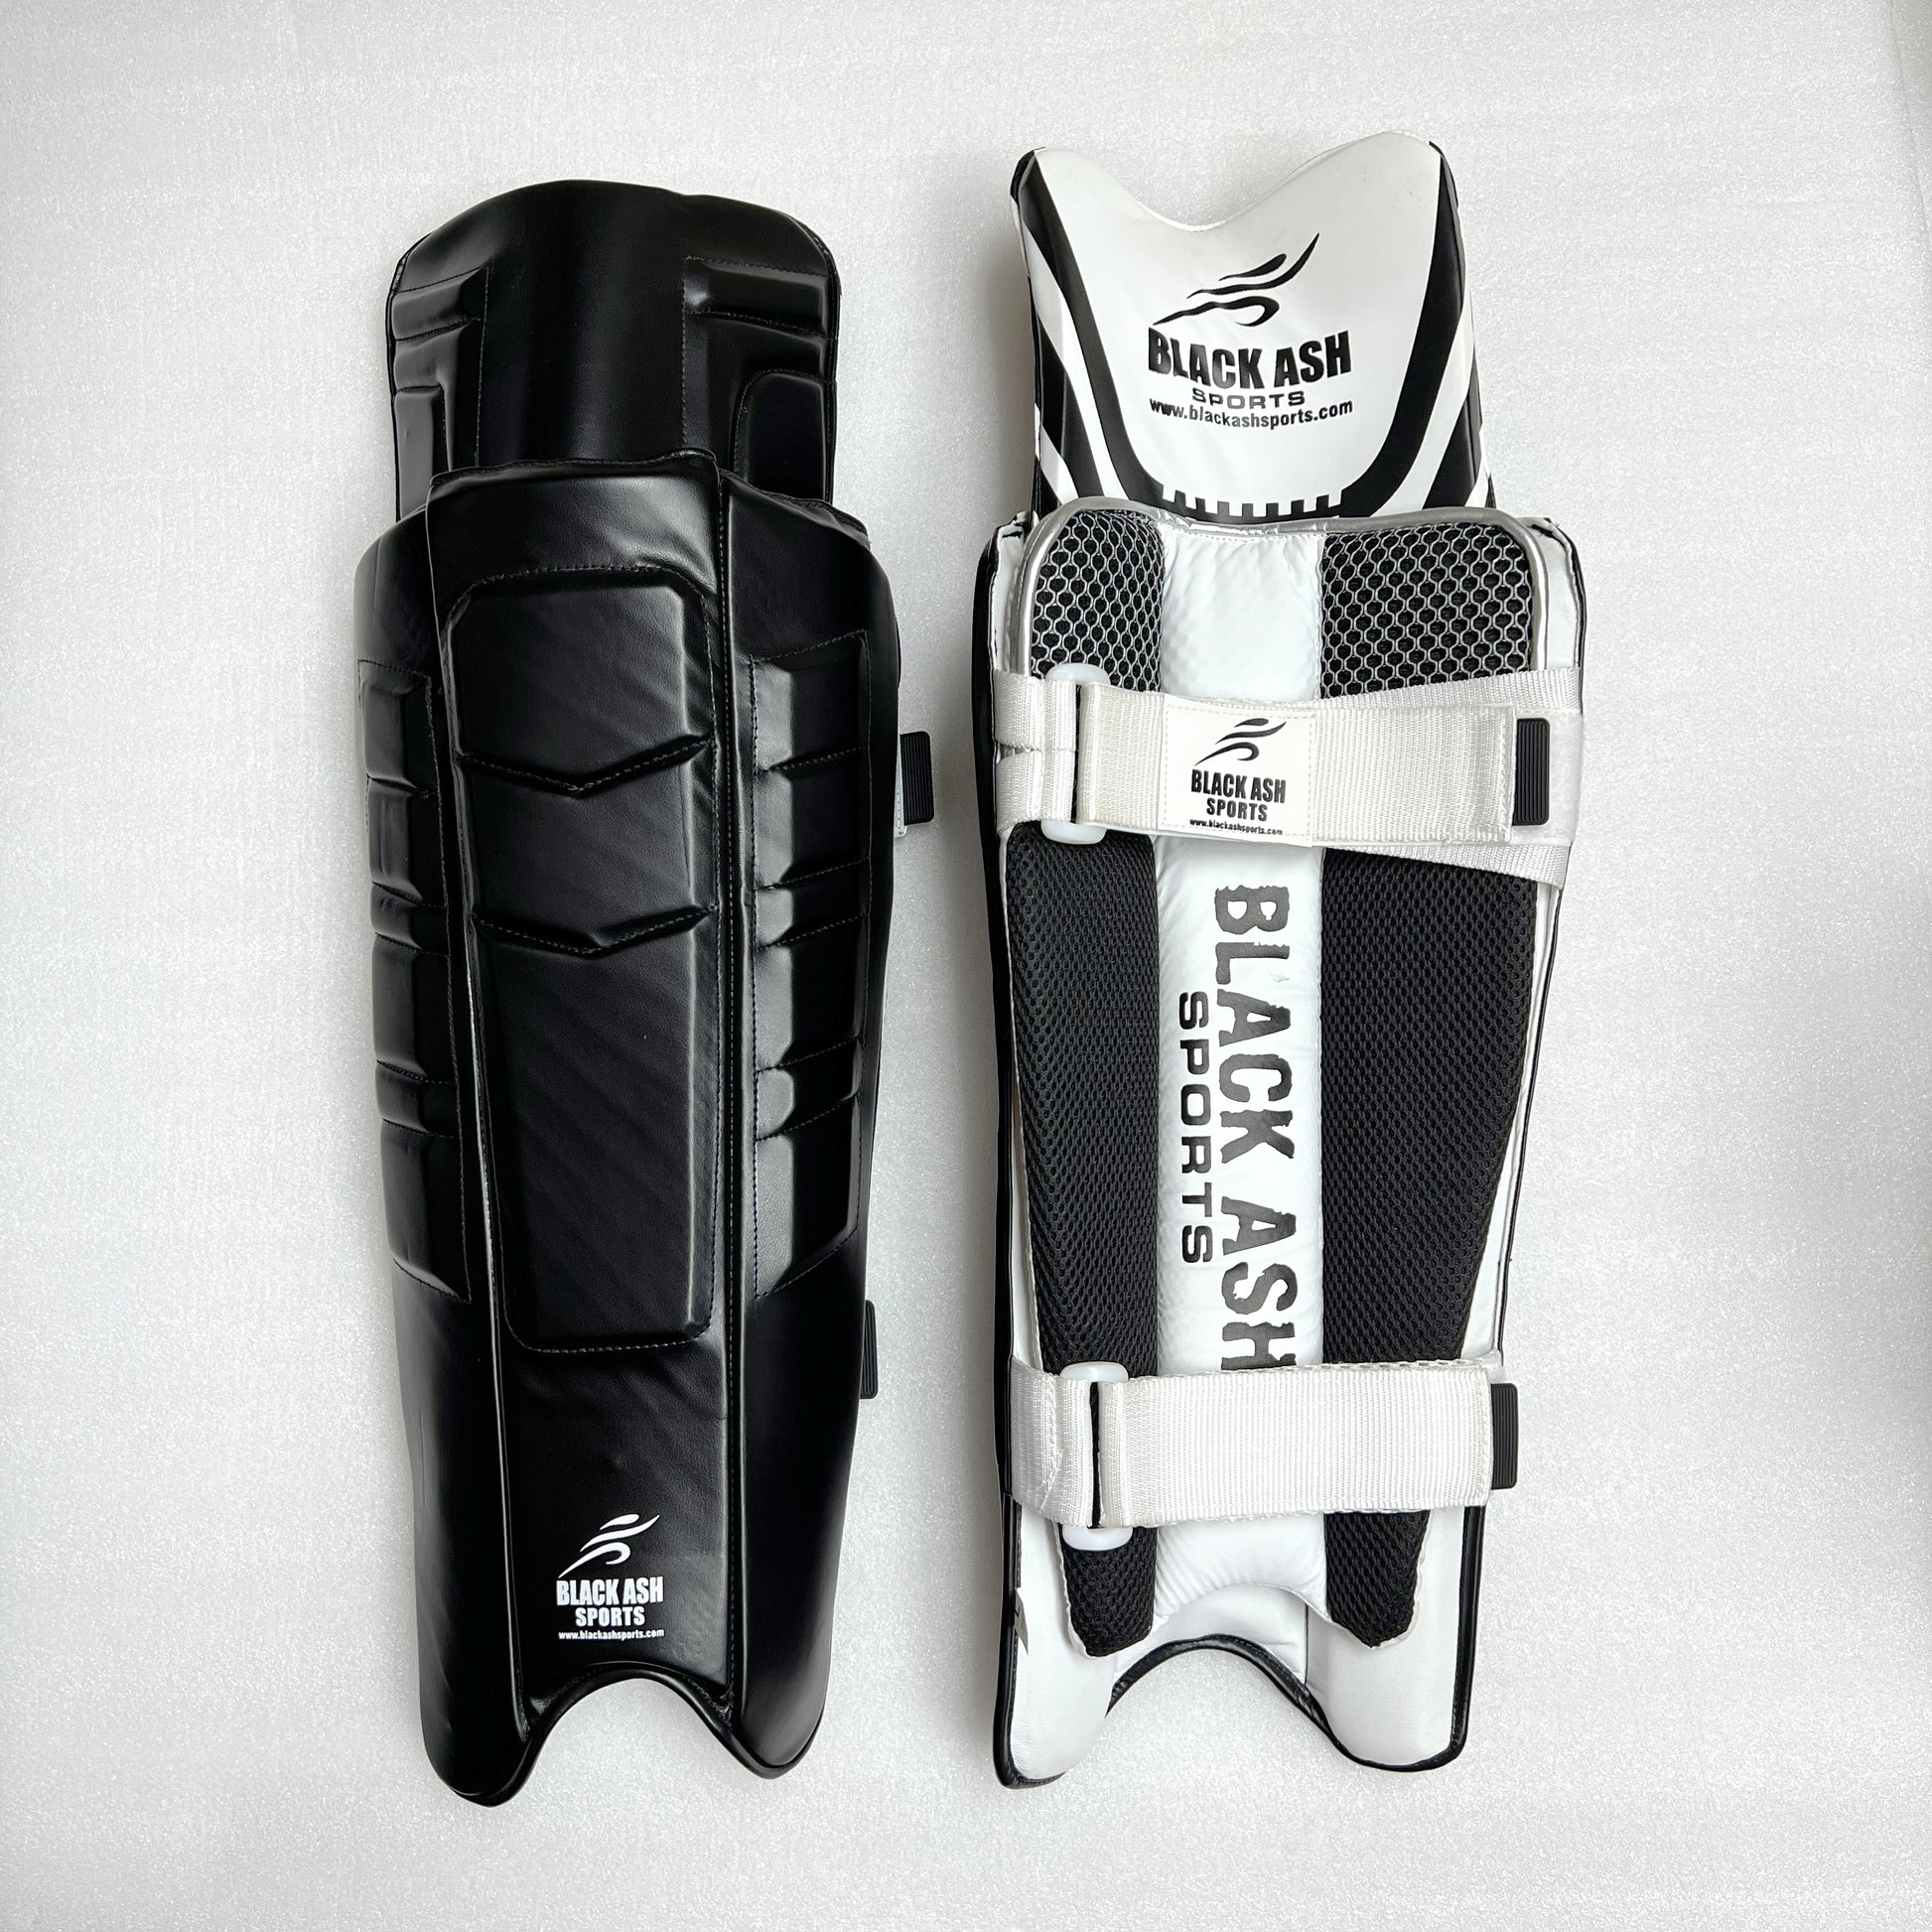 Black Ash Signature Batting Pads in Black, offering premium quality, lightweight and ultra-comfortable design with 3 Velcro straps, suitable for players seeking protection without sacrificing mobility, available in multiple colors.